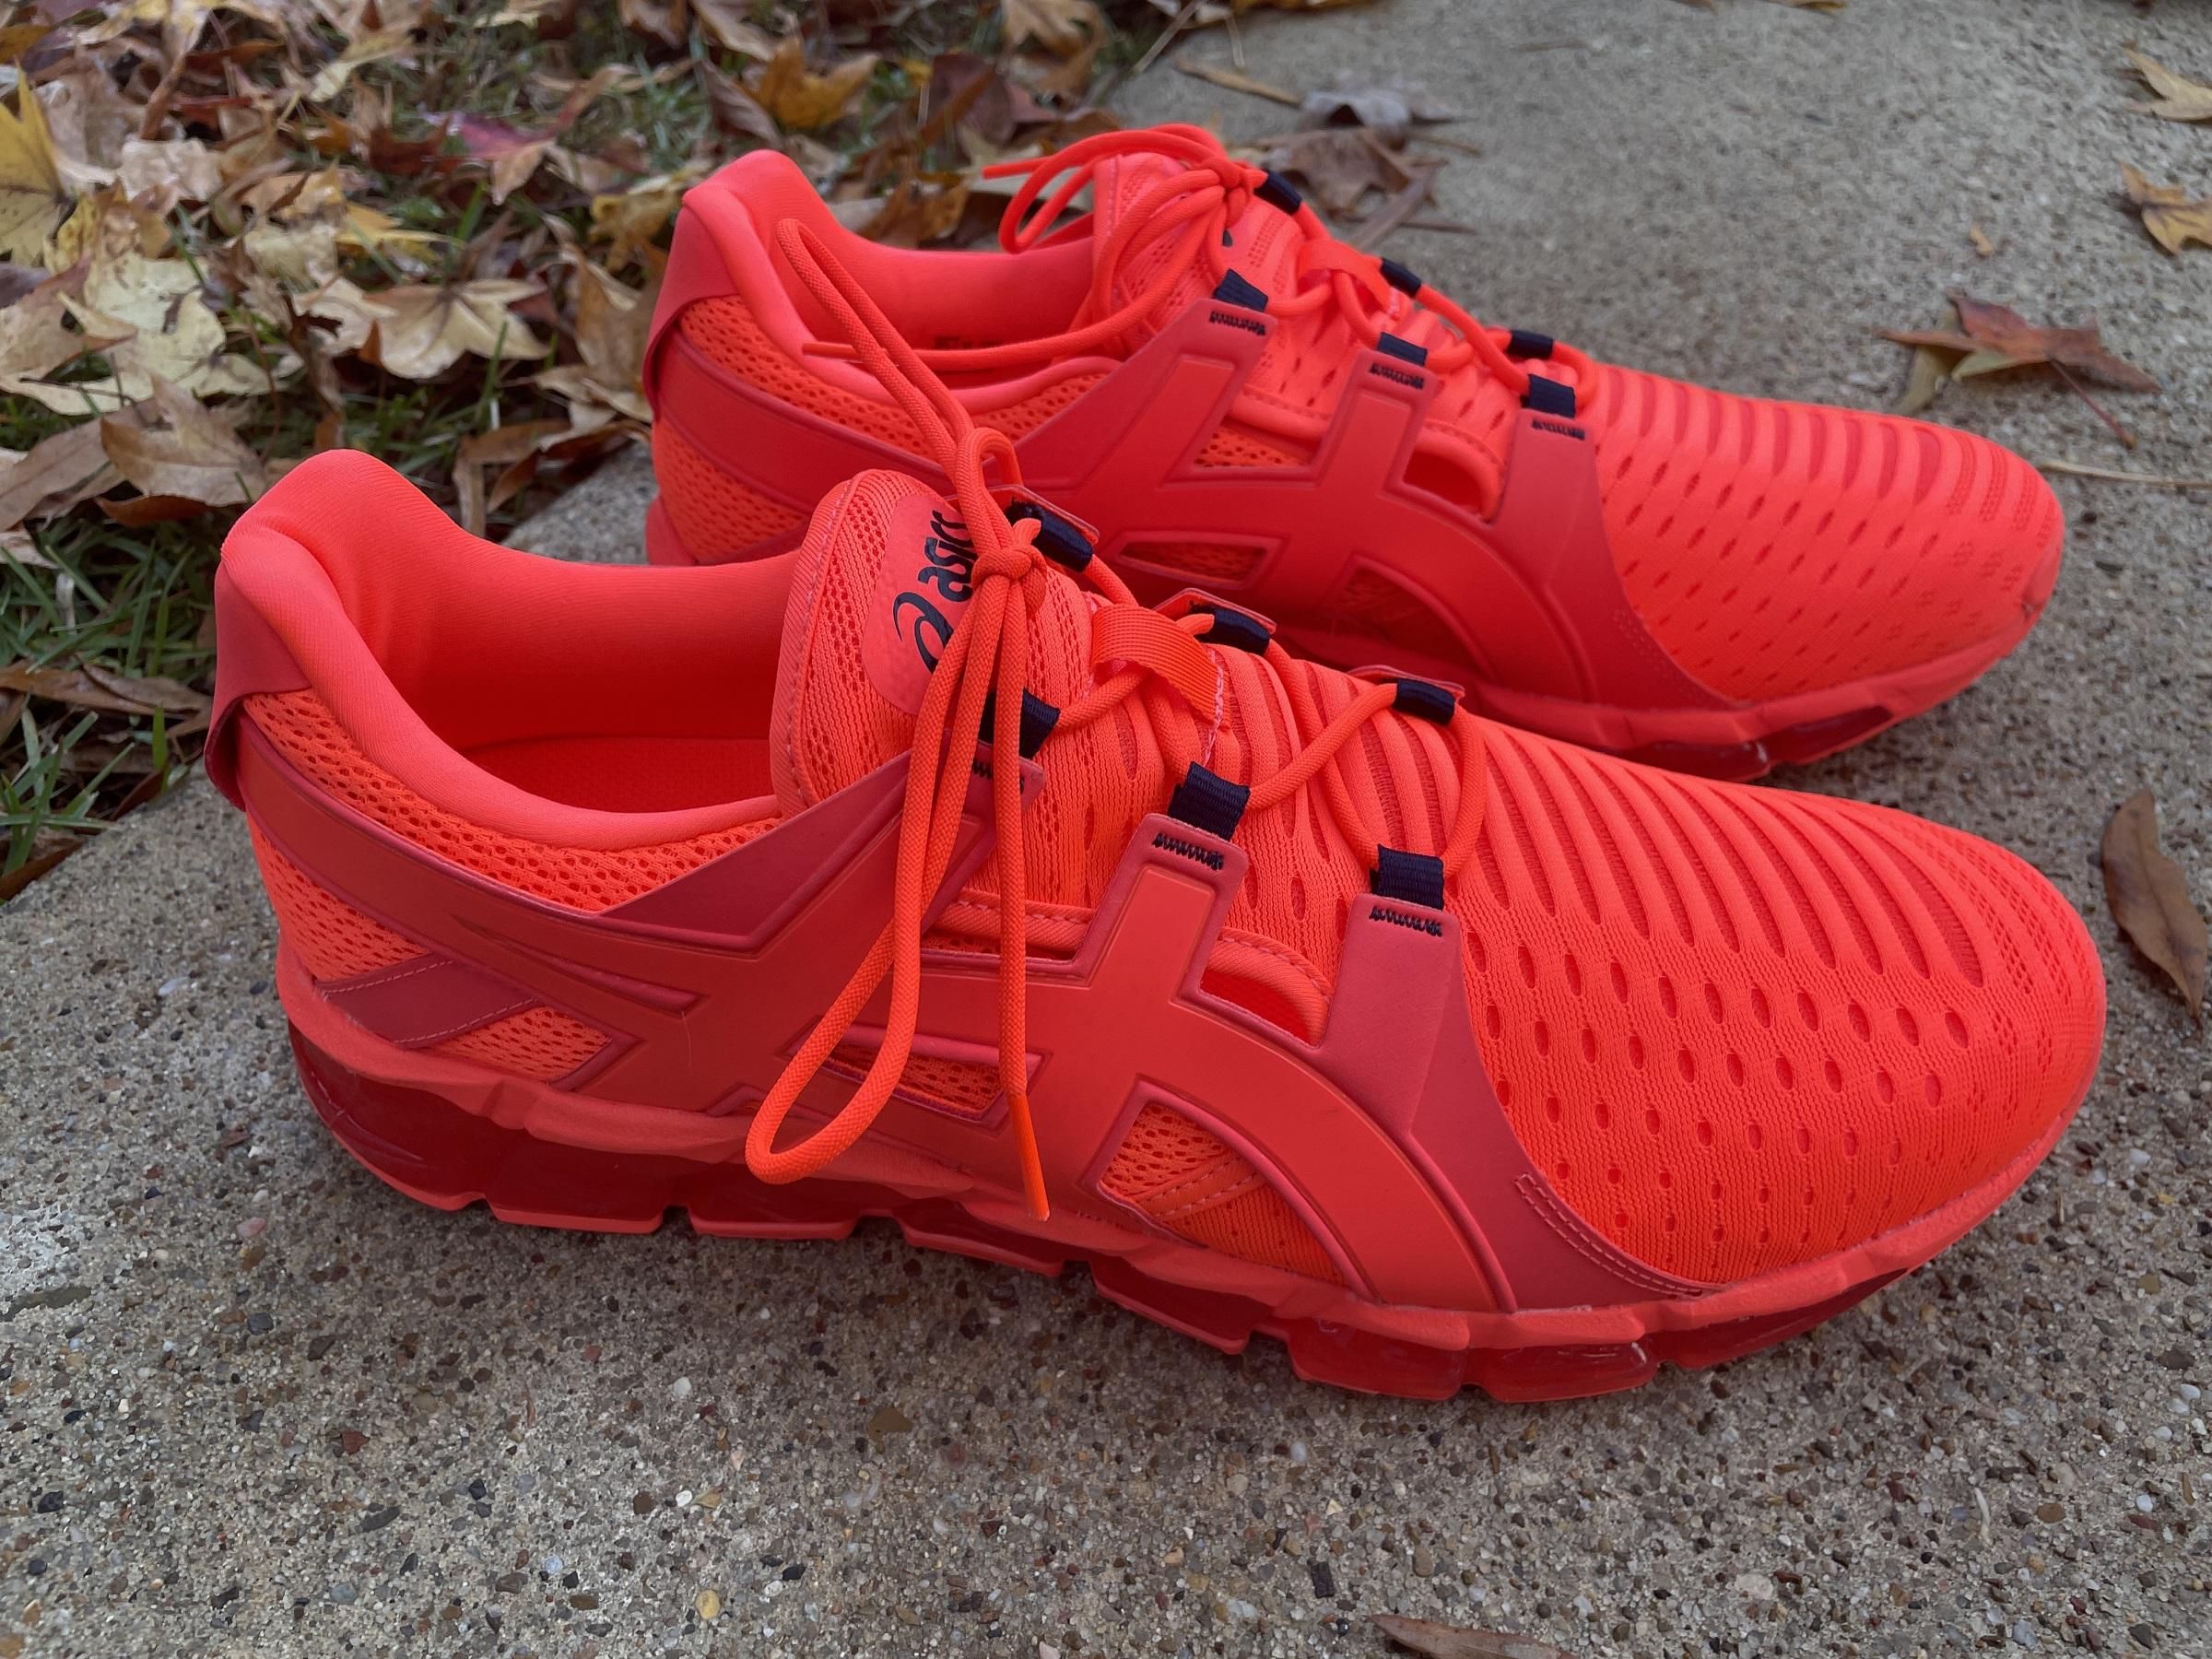 ASICS Gel Quantum 360, review and details, From £ 102.00